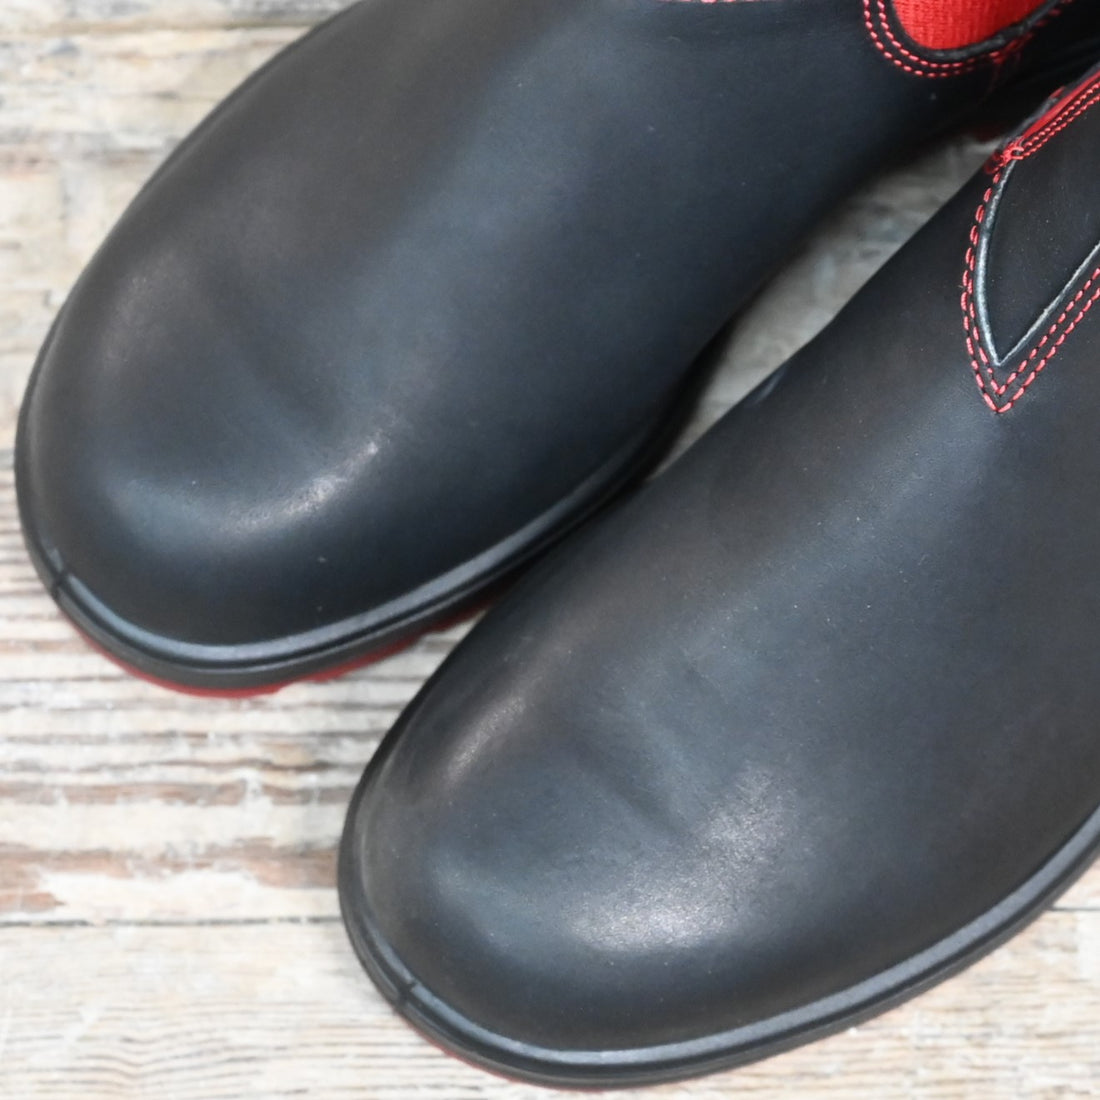 Blundstone Slip On In Black Premium Leather With Red Elastic And Red Outsole view of toe